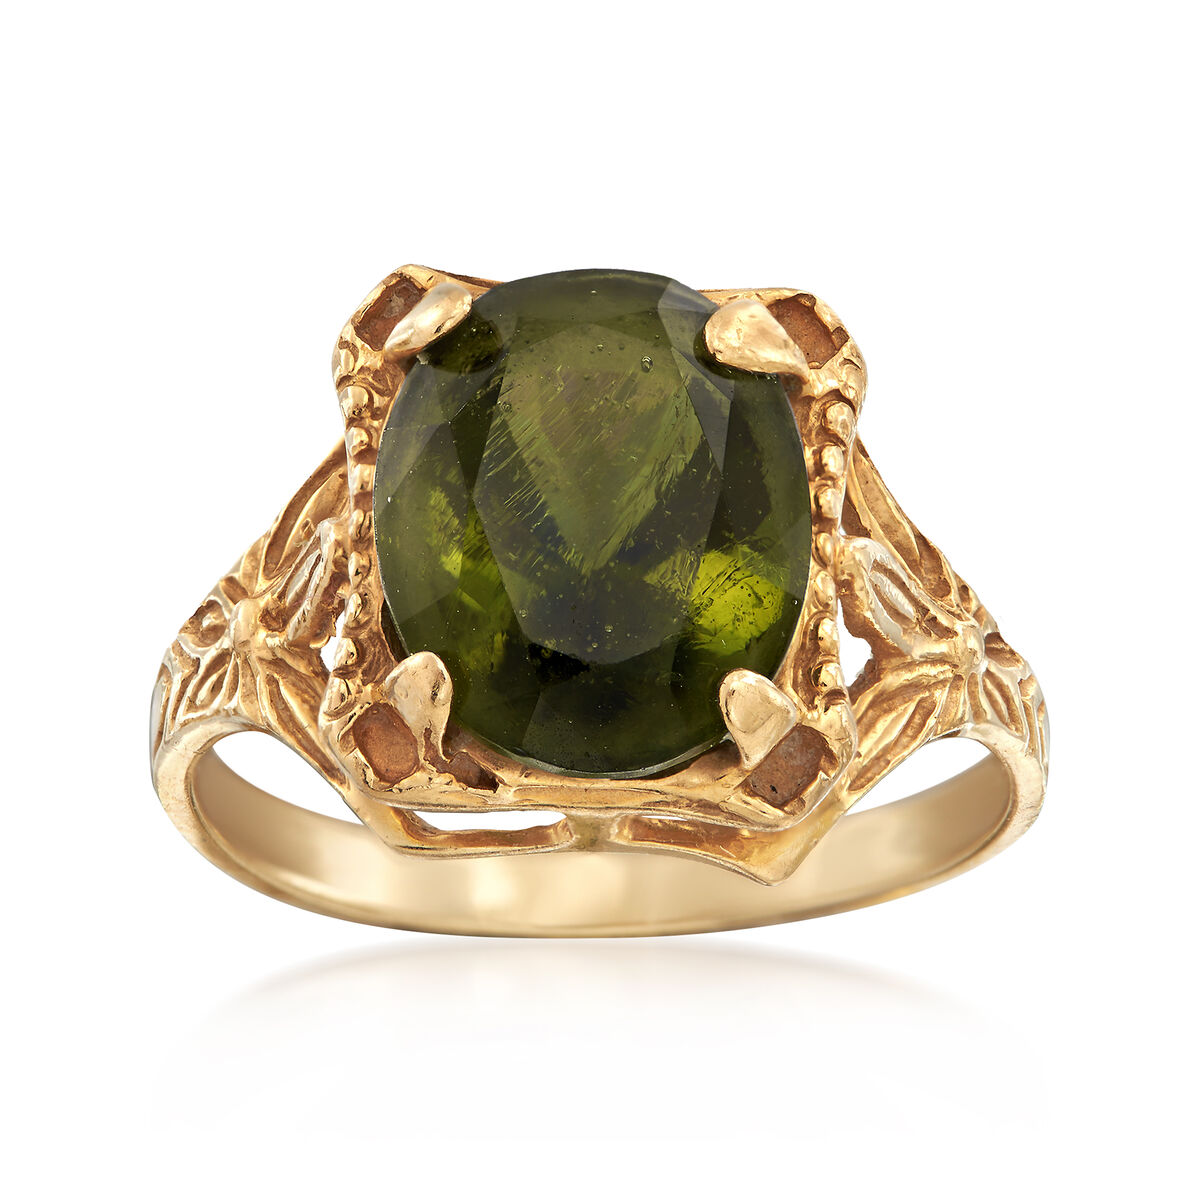 C. Vintage 2.60 Carat Ring in 14kt Yellow Gold | Ross-Simons